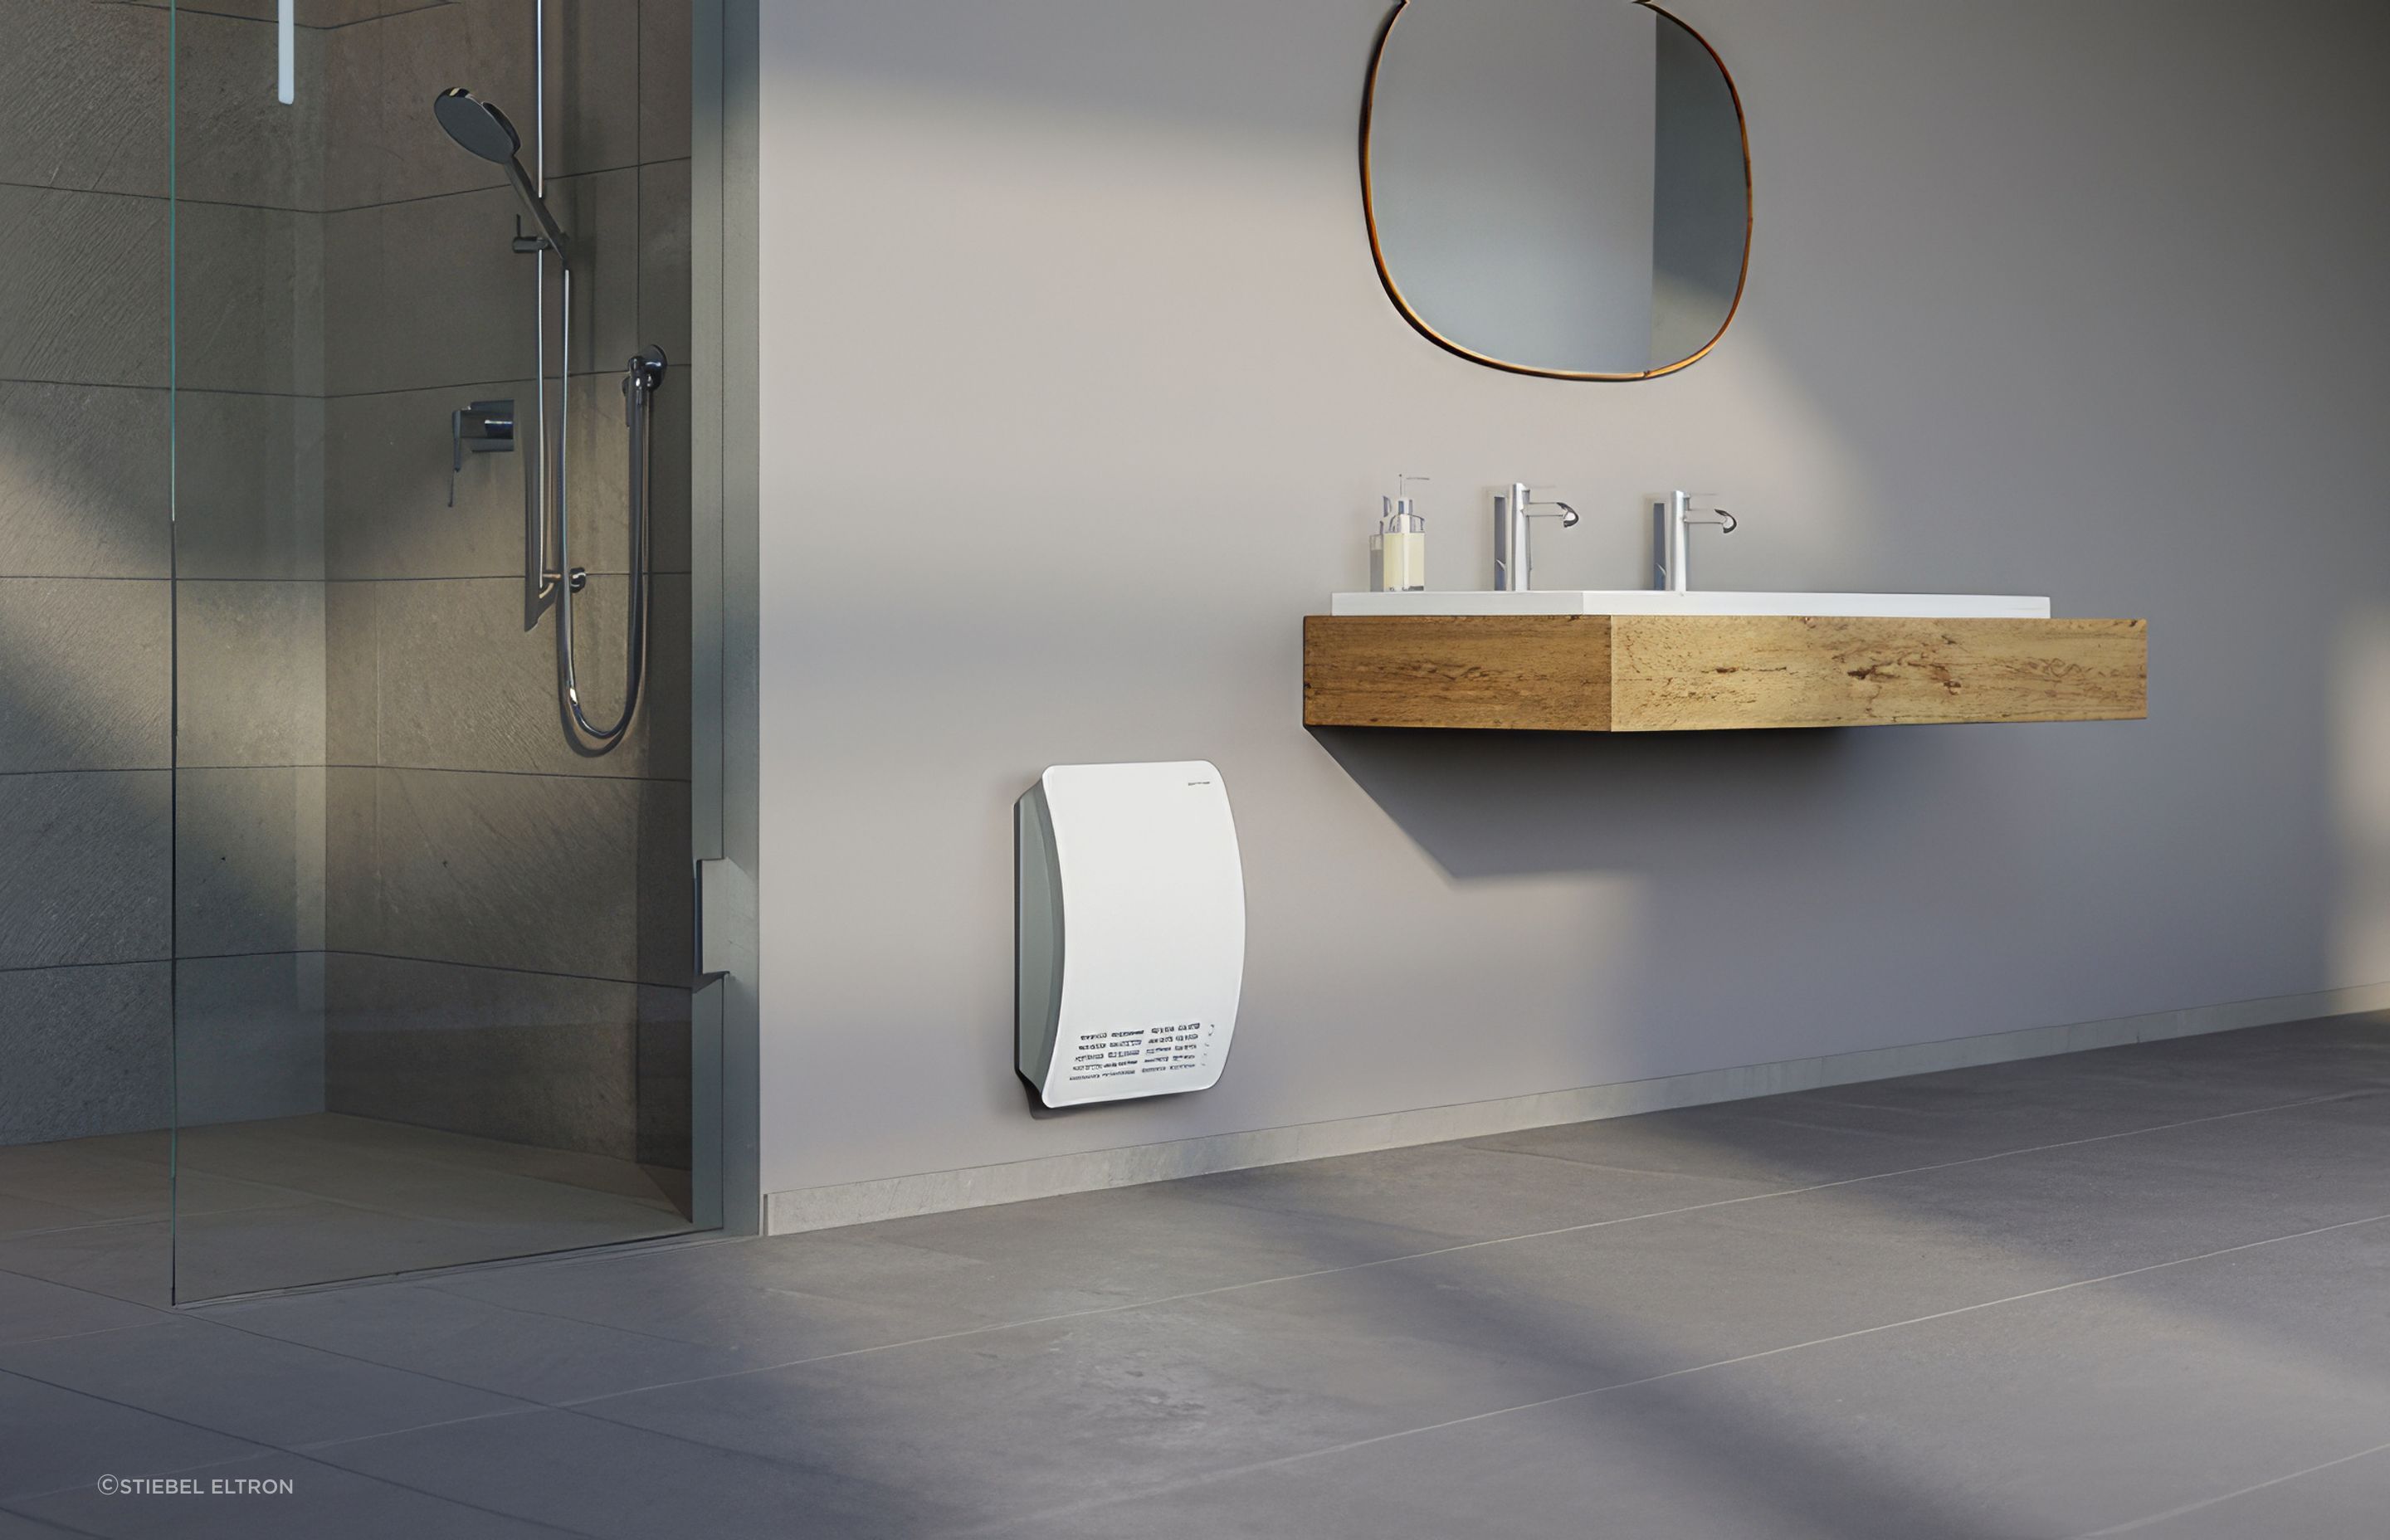 The high-spec CK Plus fan heater offers fast, efficient and quiet heating for the bathroom.